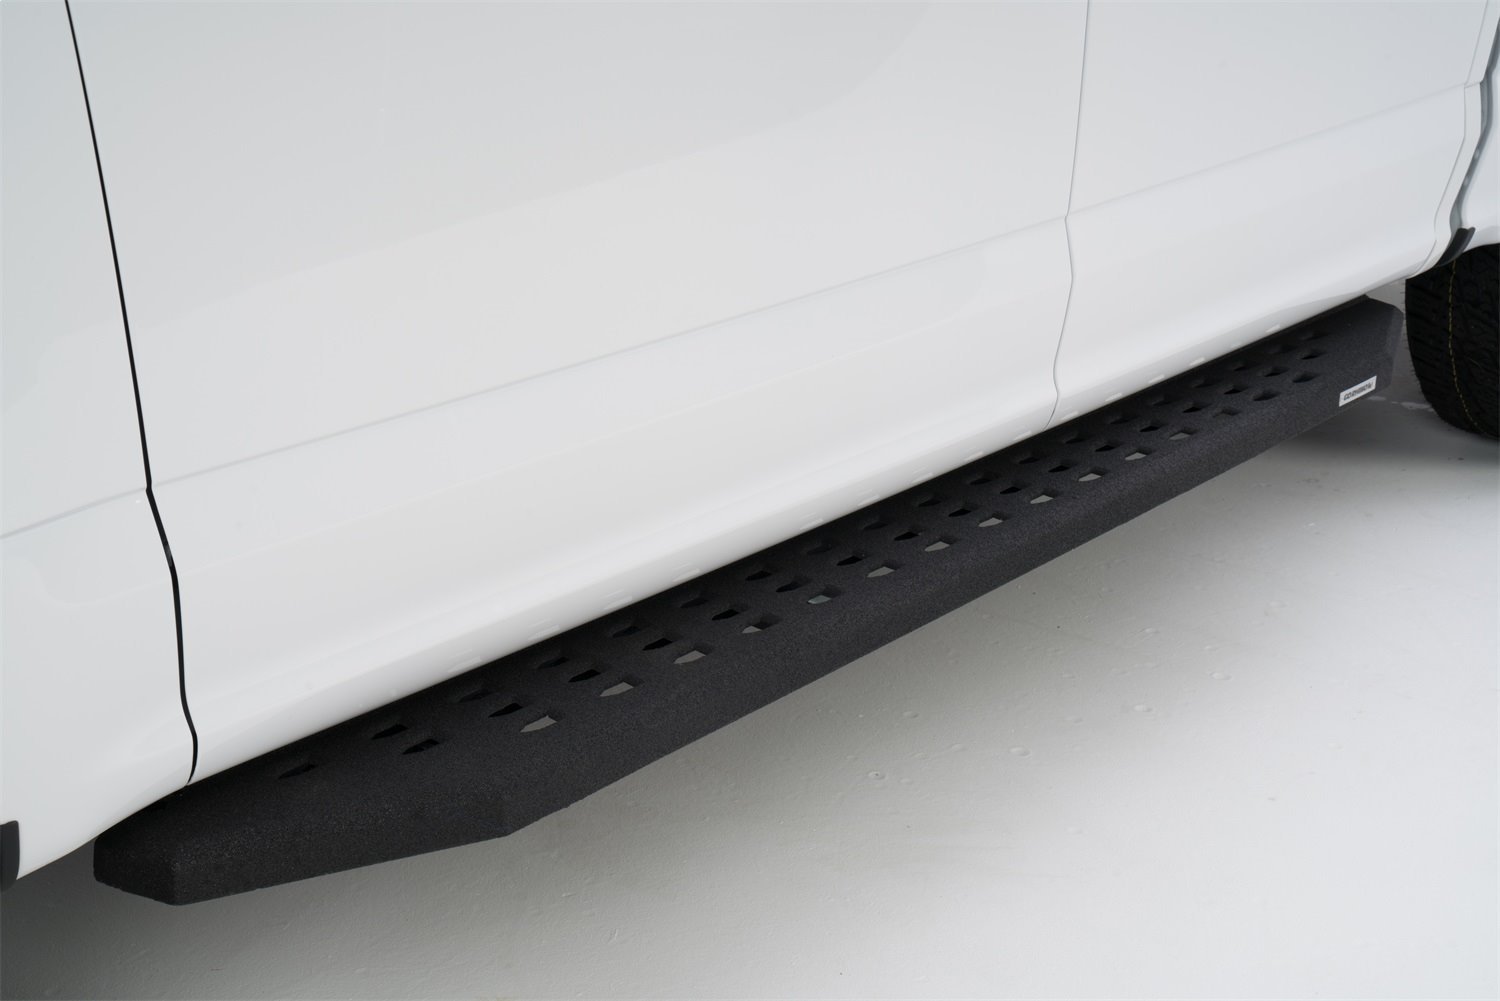 RB20 Running boards for 2015-2017 Ford F150/2017 Ford F150 Raptor